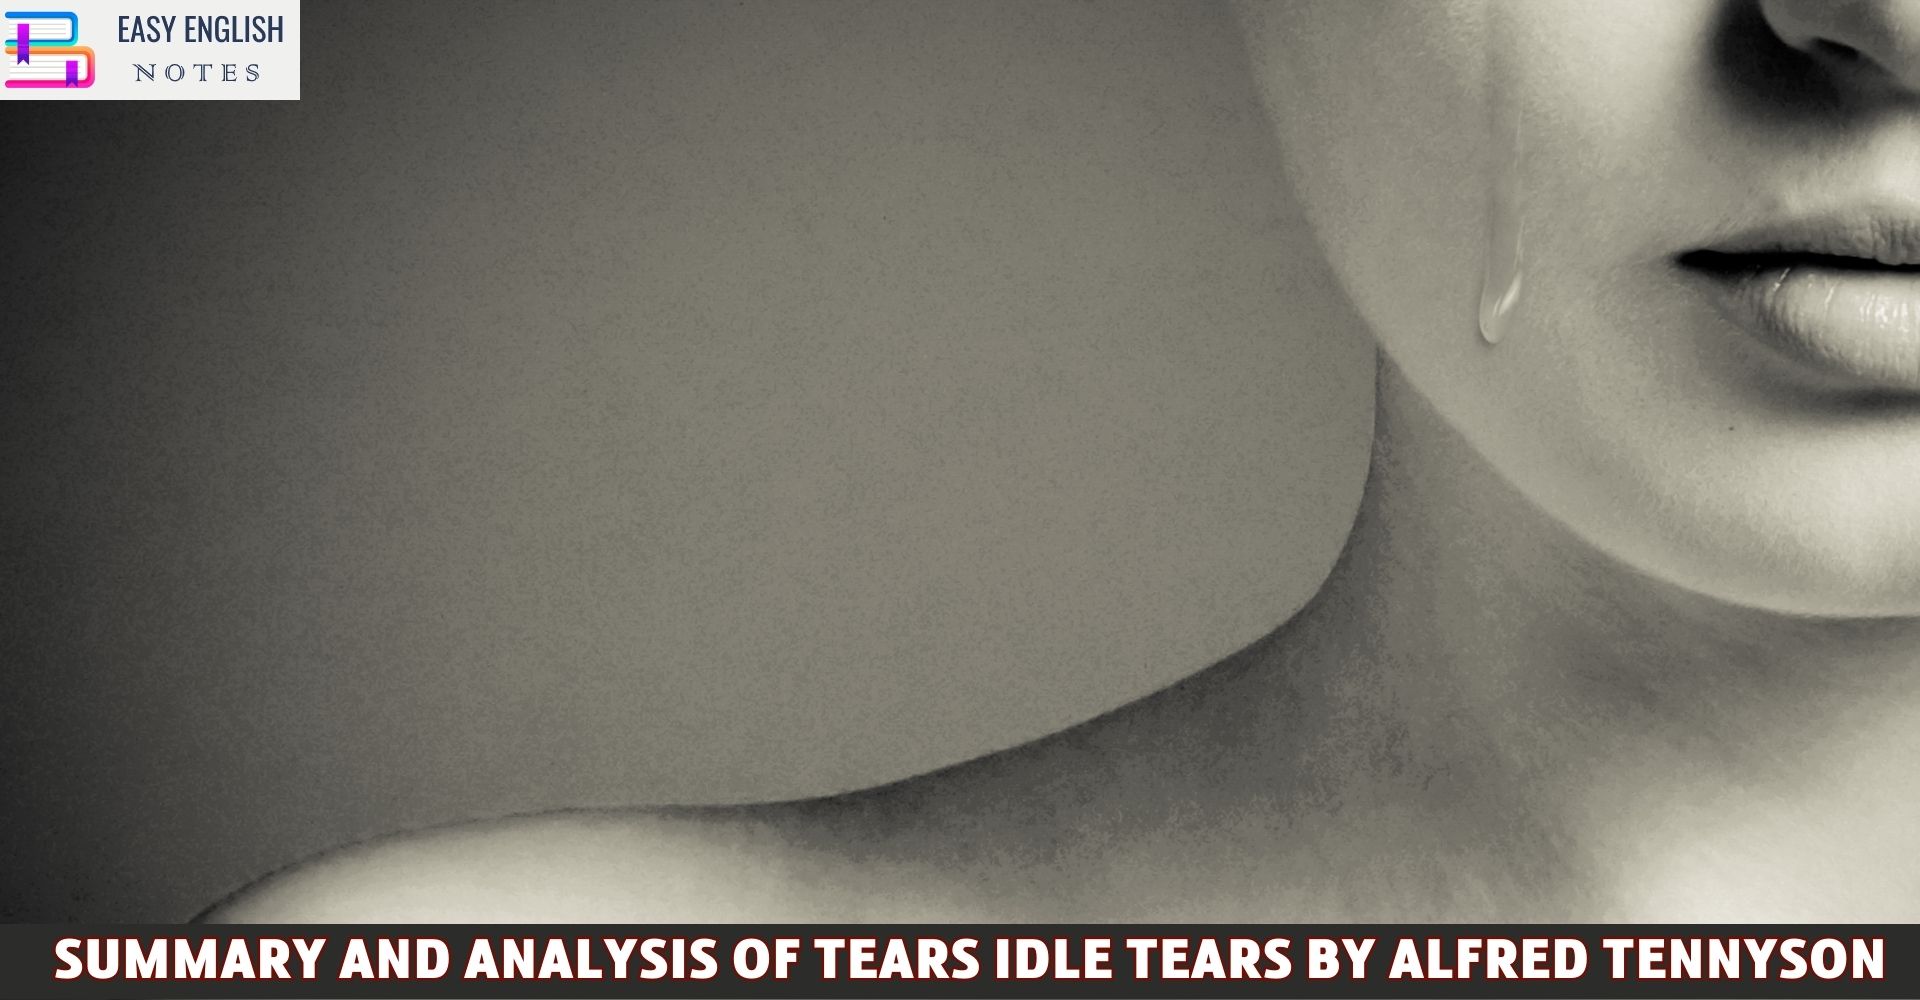 Summary and Analysis of Tears Idle Tears by Alfred Tennyson